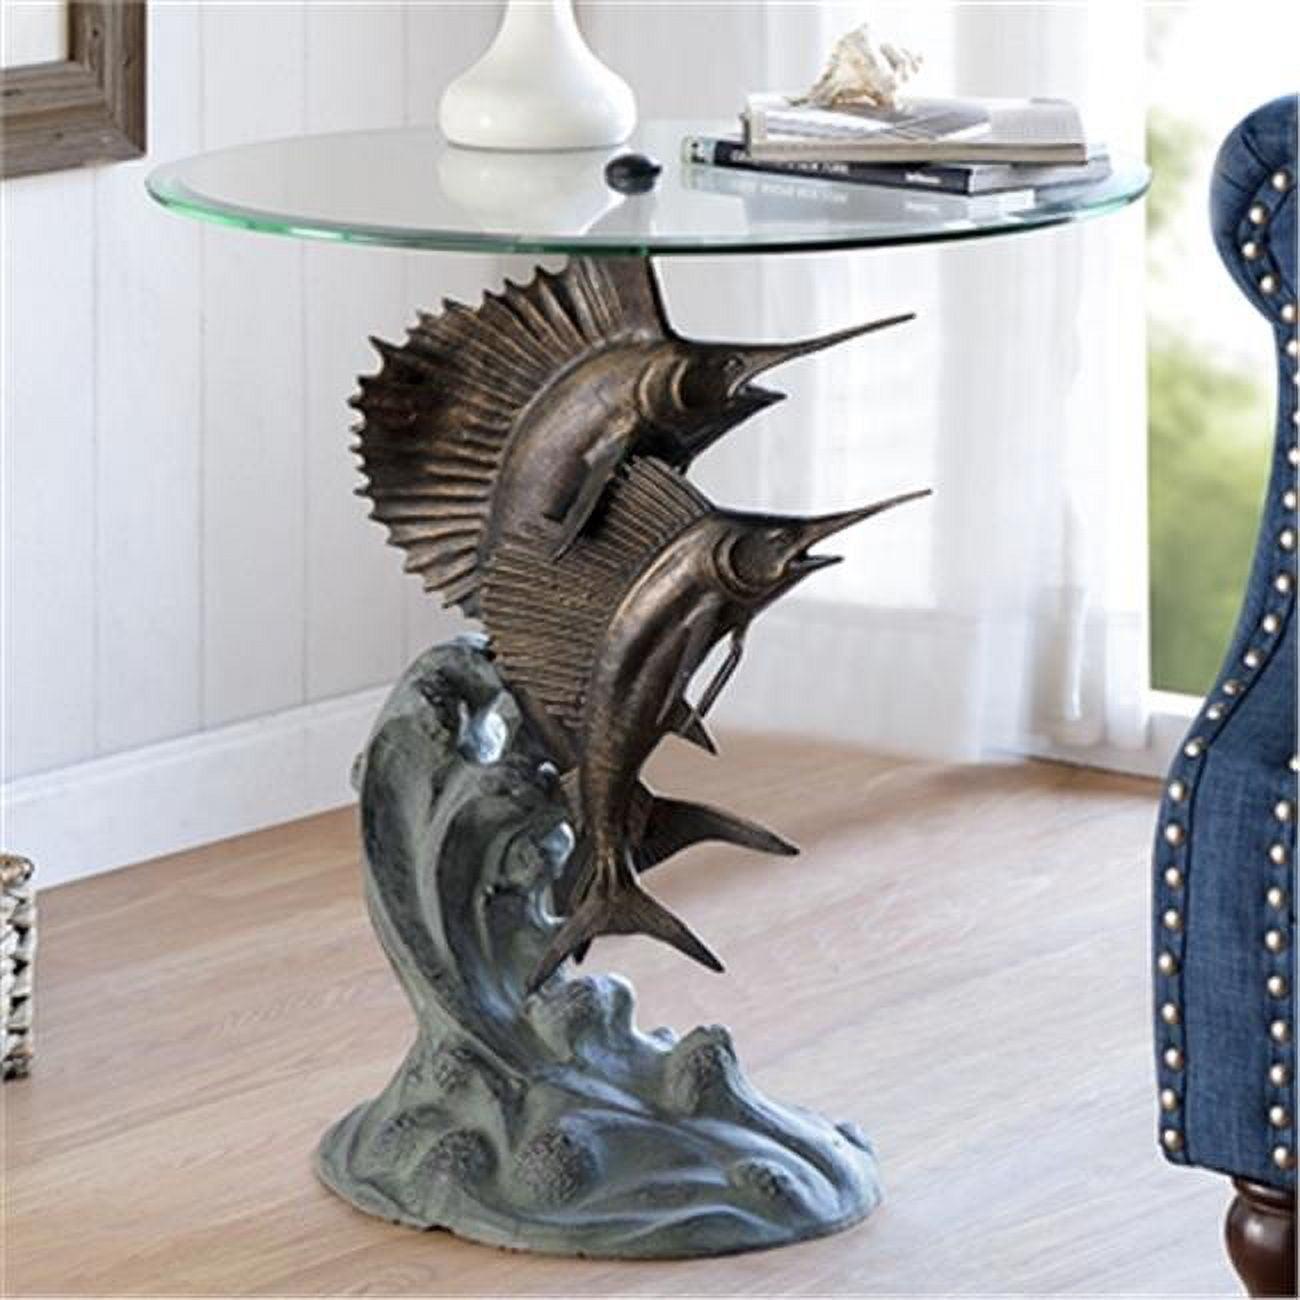 Marlin and Sailfish Pedestal End Table with Glass Top, 22" Bronze Finish